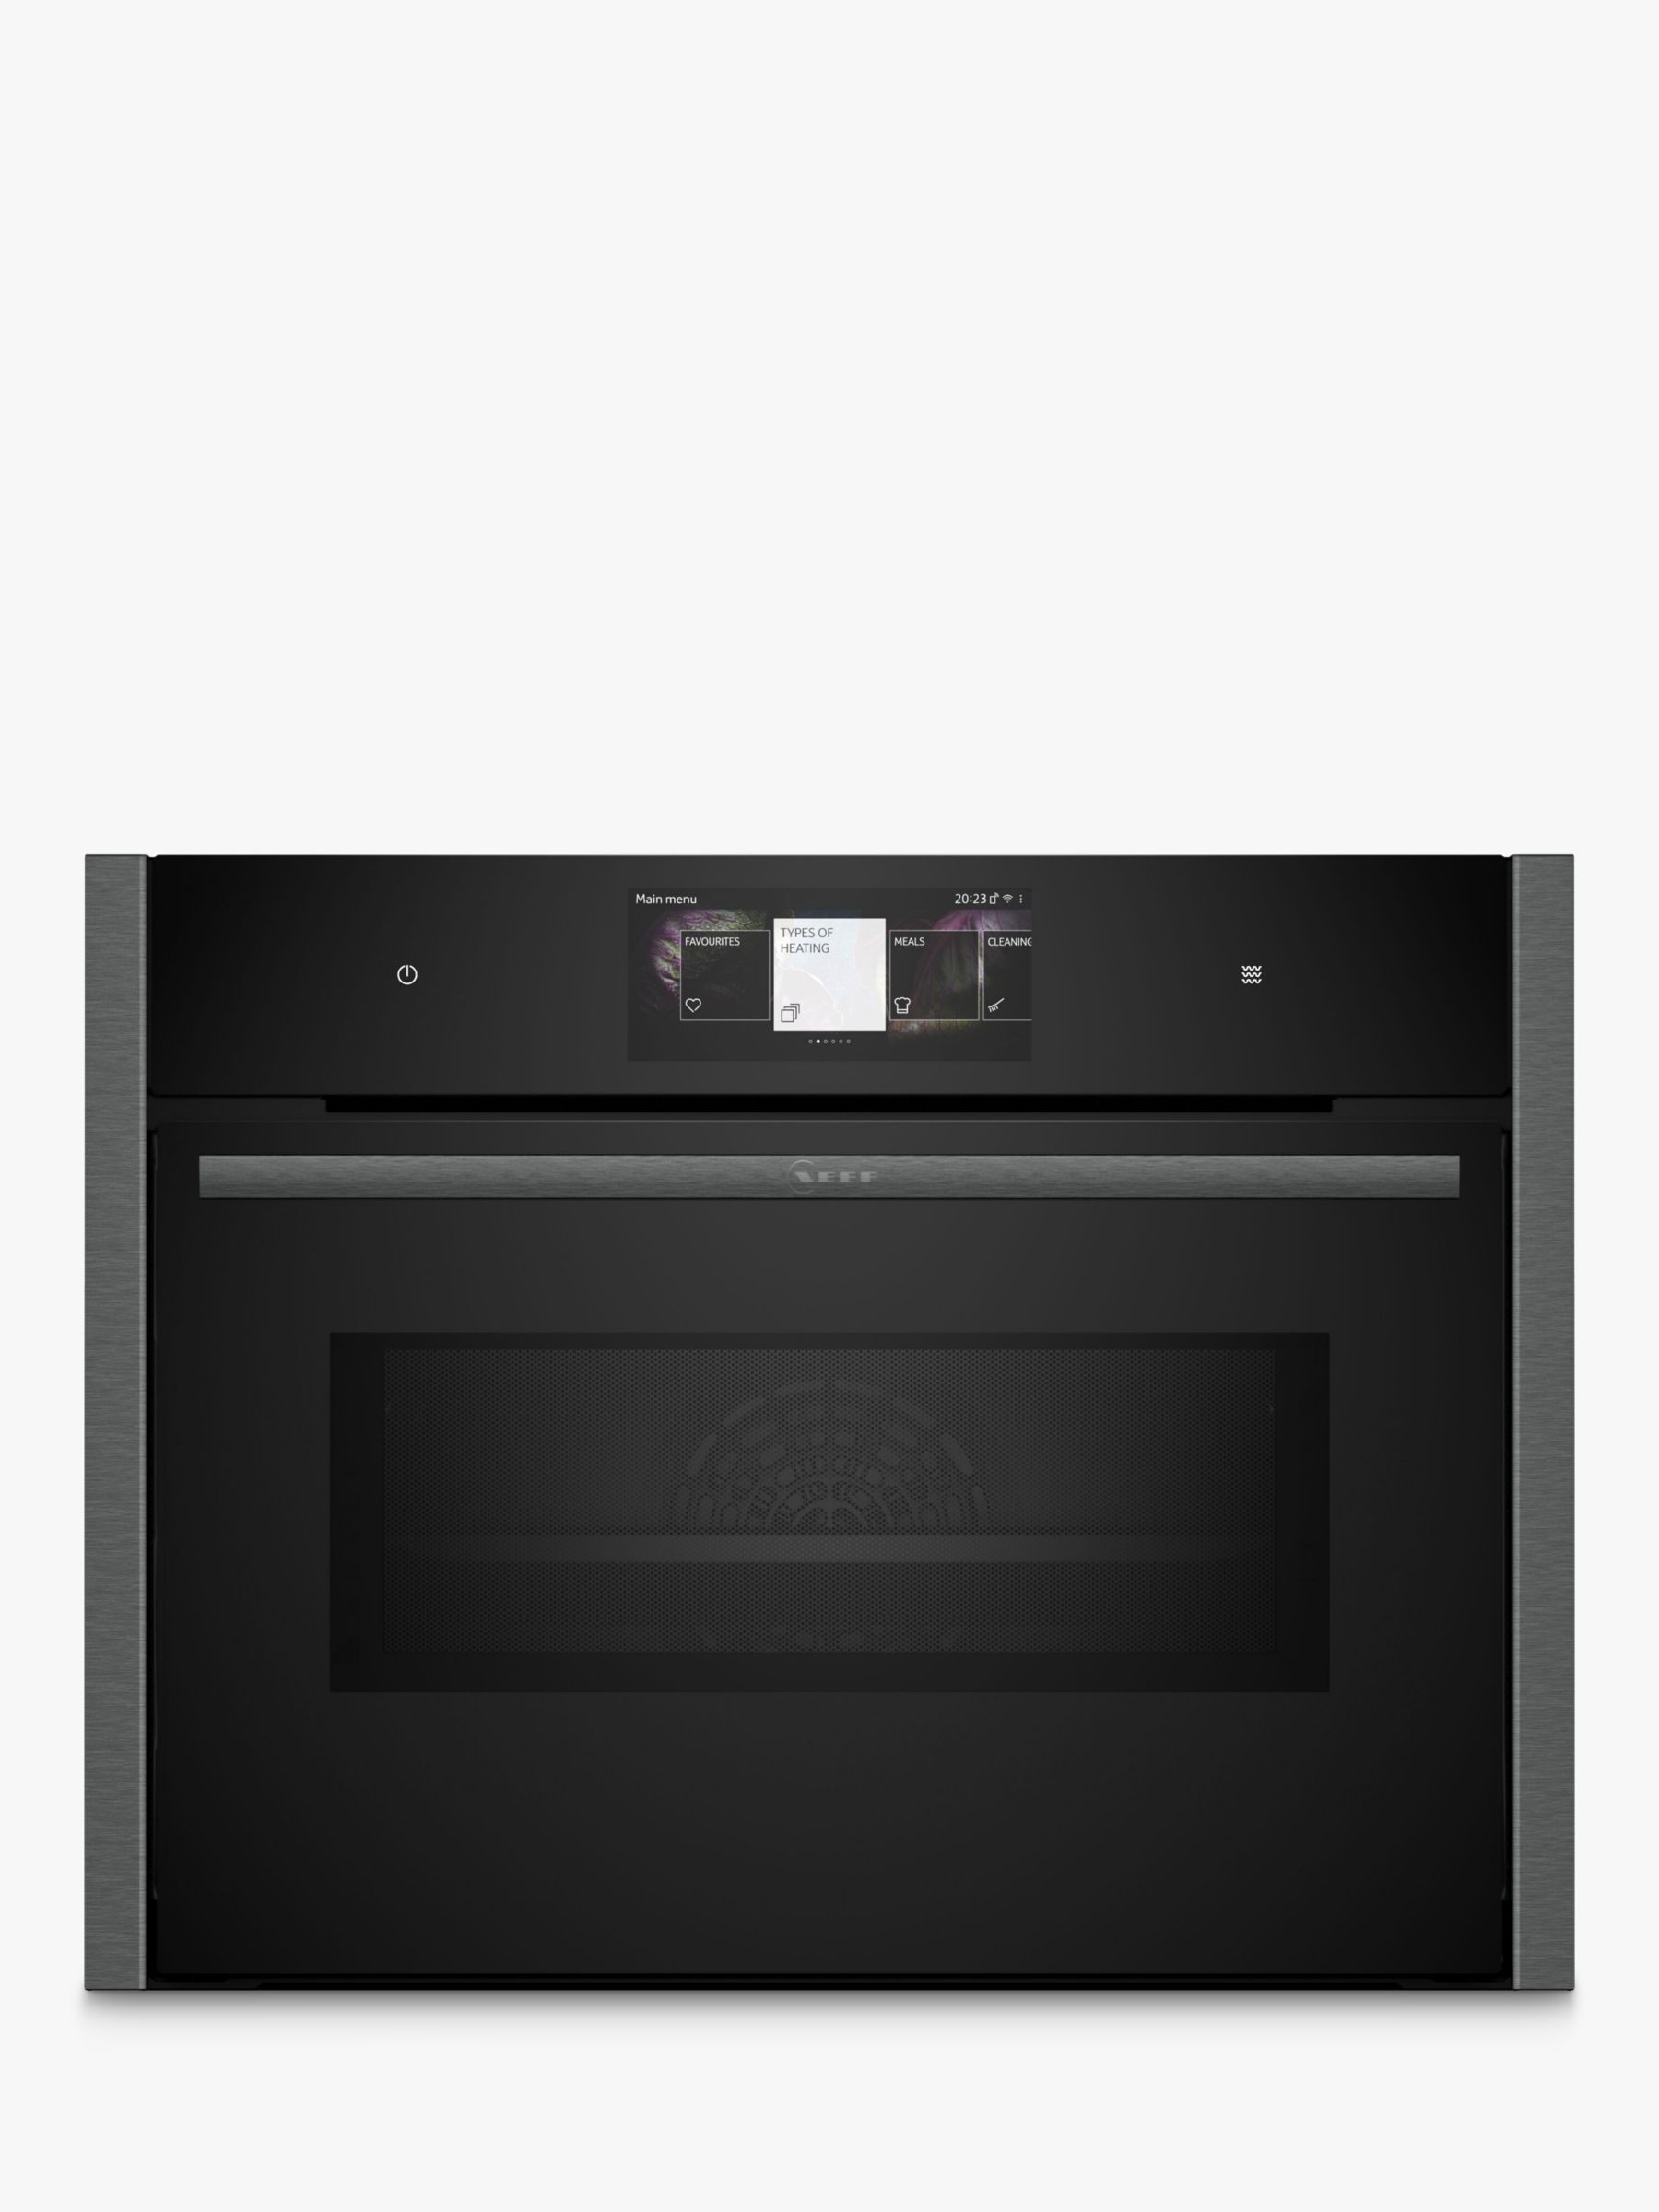 Neff N90 C24MT73G0B Built In Electric Compact Oven with Microwave, Grey Graphite